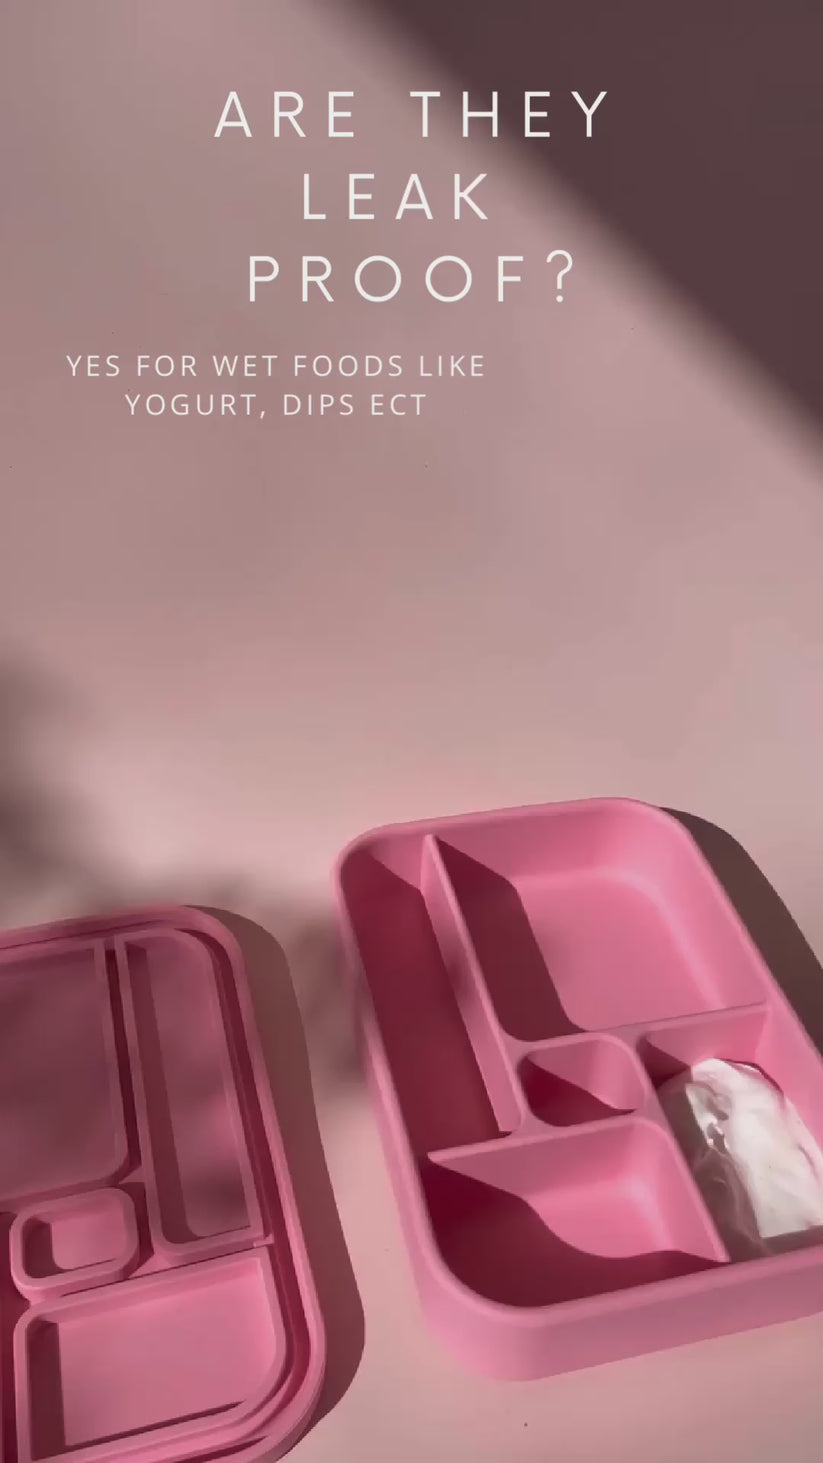 Video showing leak proof feature of Bento Lunchbox from The Zero Waste People